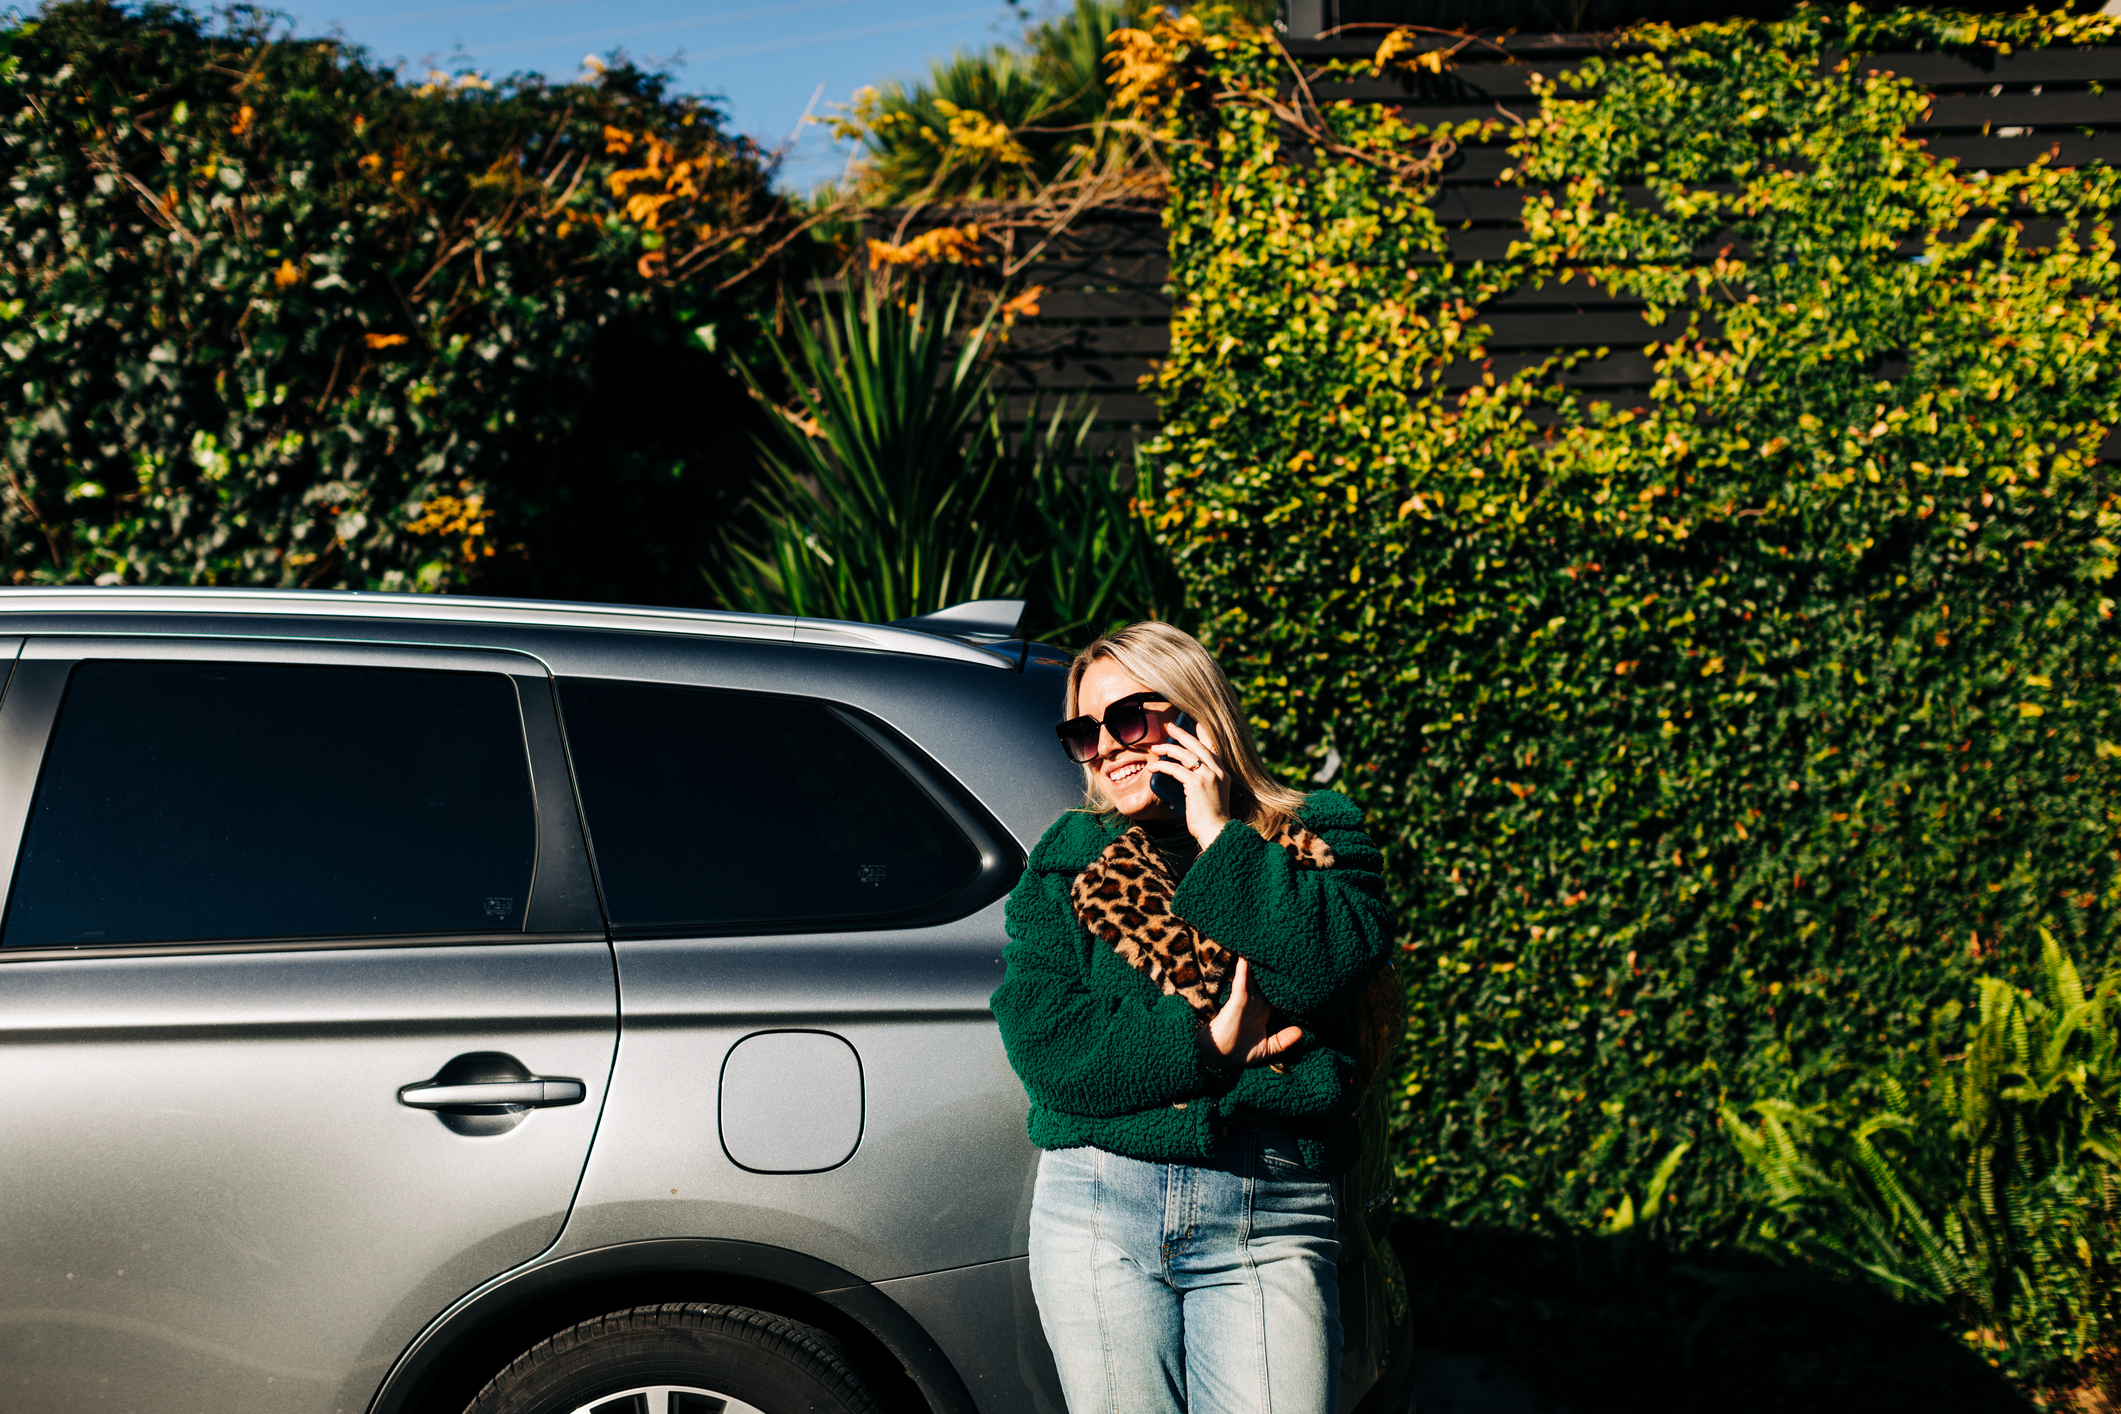 Woman standing beside car holding mobile phone